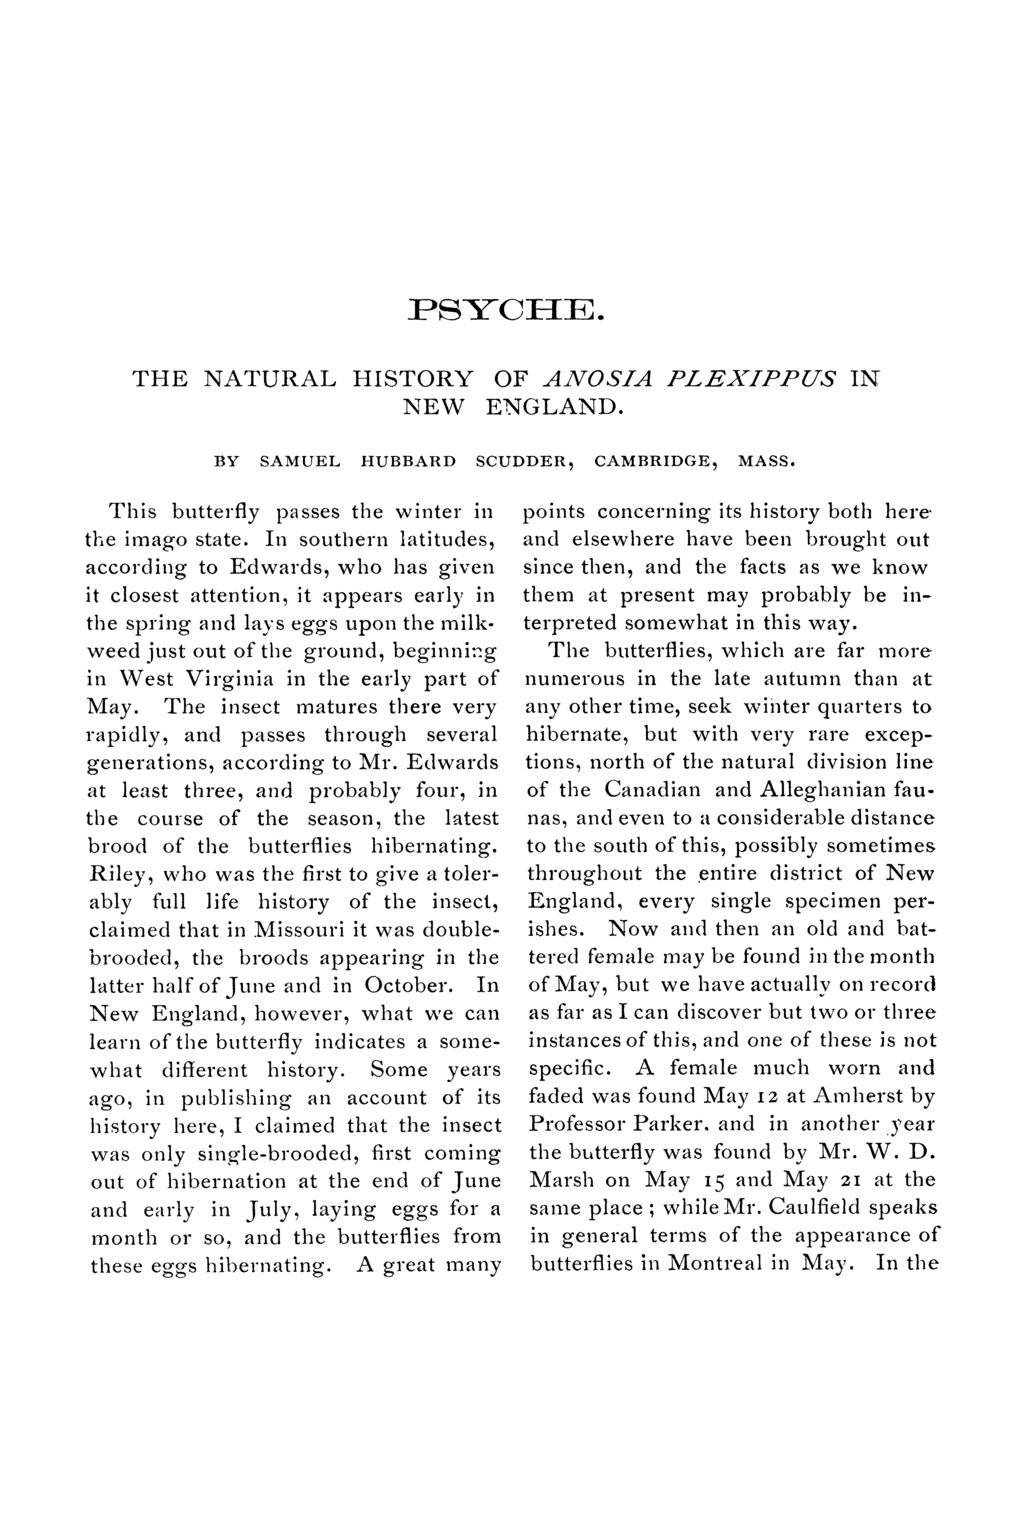 PSYCHE. THE NATURAL HISTORY OF ANOSIA PLEXIPPUS IN NEW ENGLAND. BY SAMUEL HUBBARD SCUDDER, CAMBRIDGE, MASS. This butterfly passes the winter in the imago state.